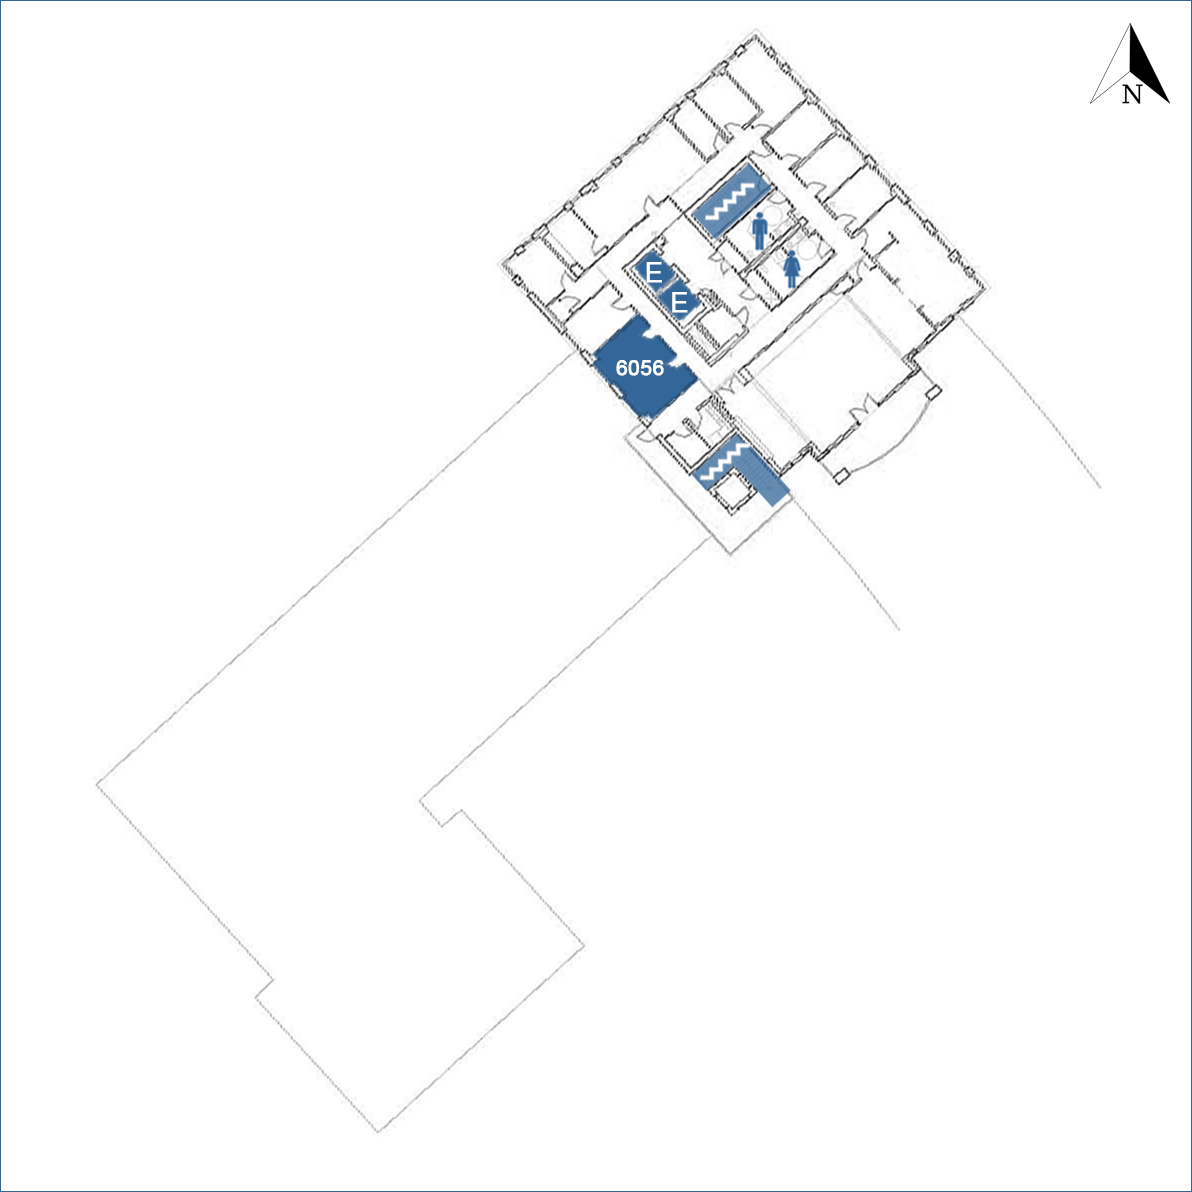 Humanities And Social Sciences Building - Floor 6 map image